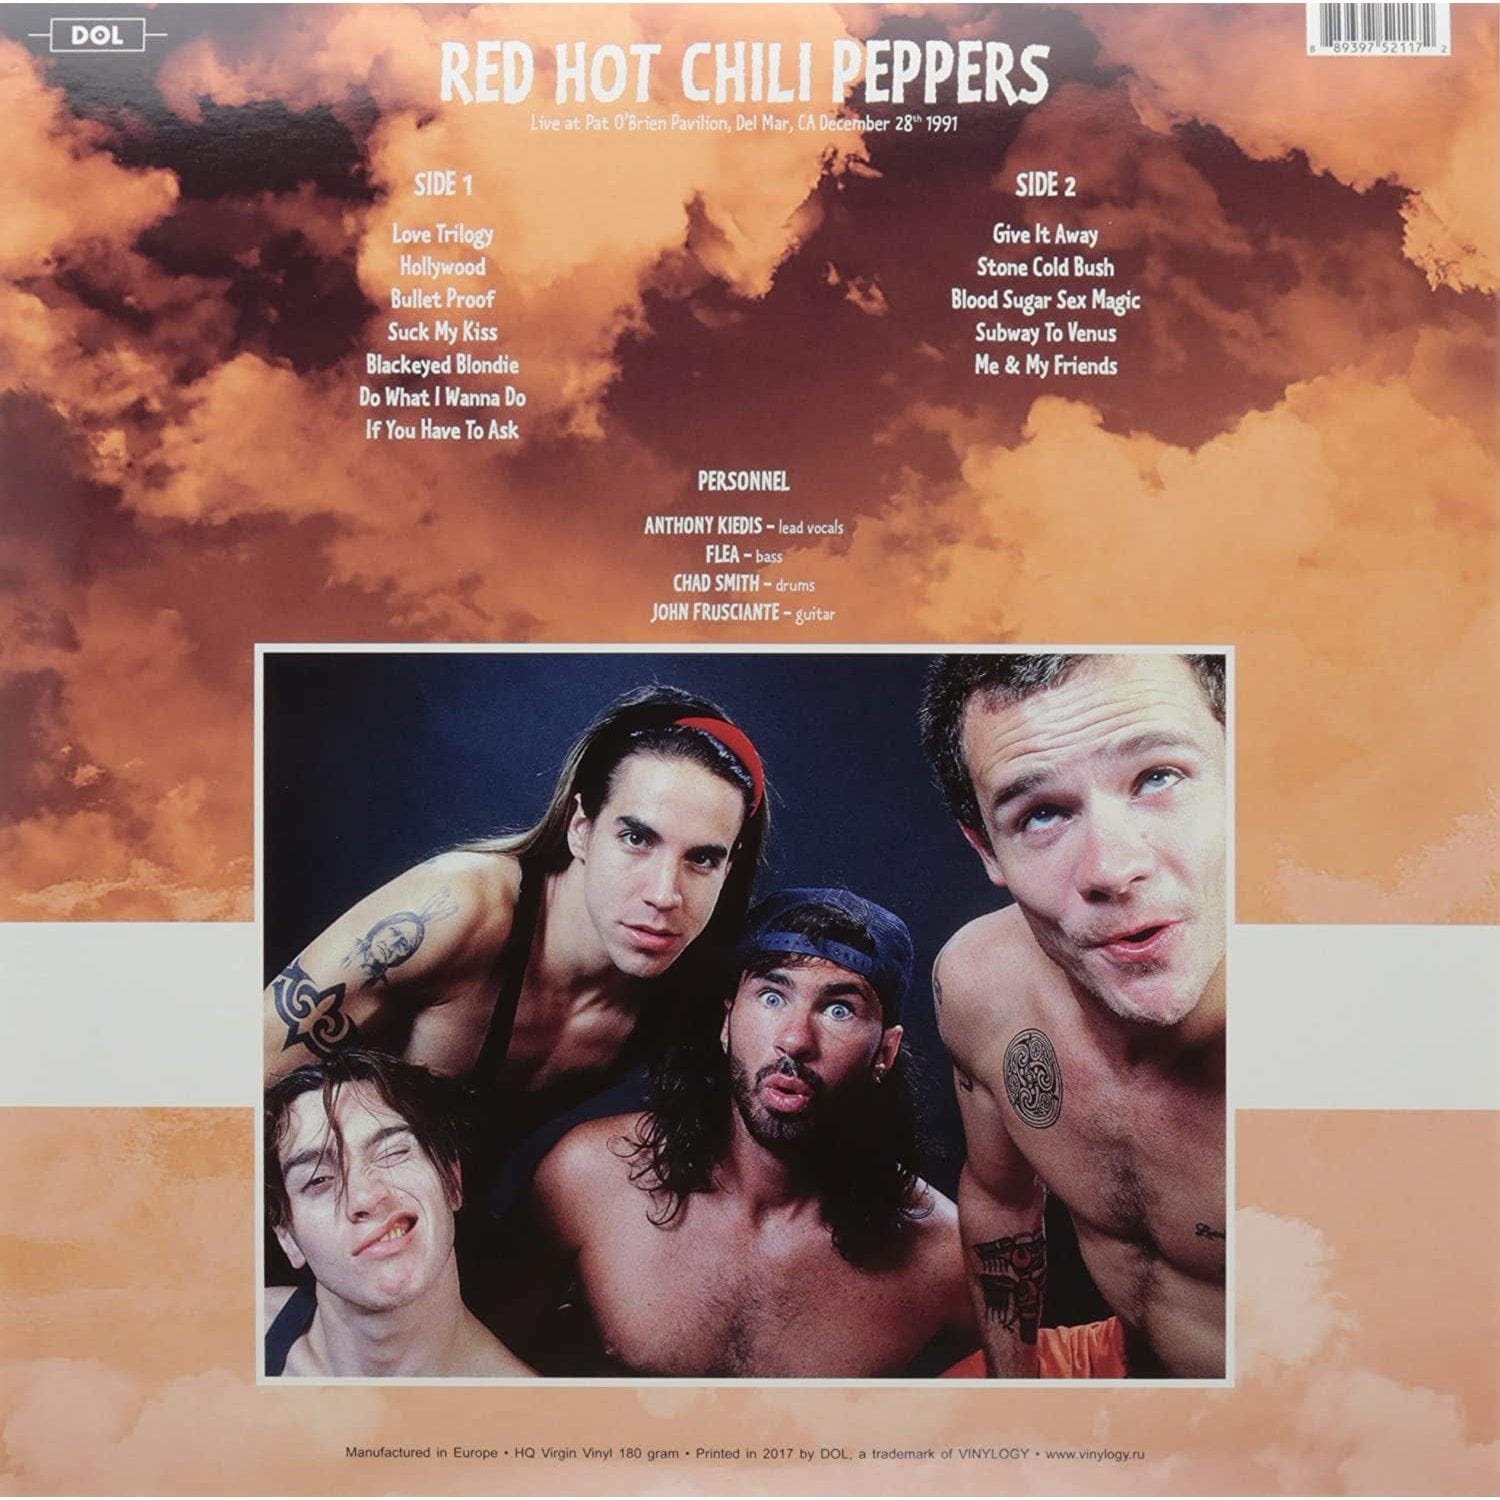 RED HOT CHILI PEPPERS - LIVE 1991 [COLOUR VINYL]